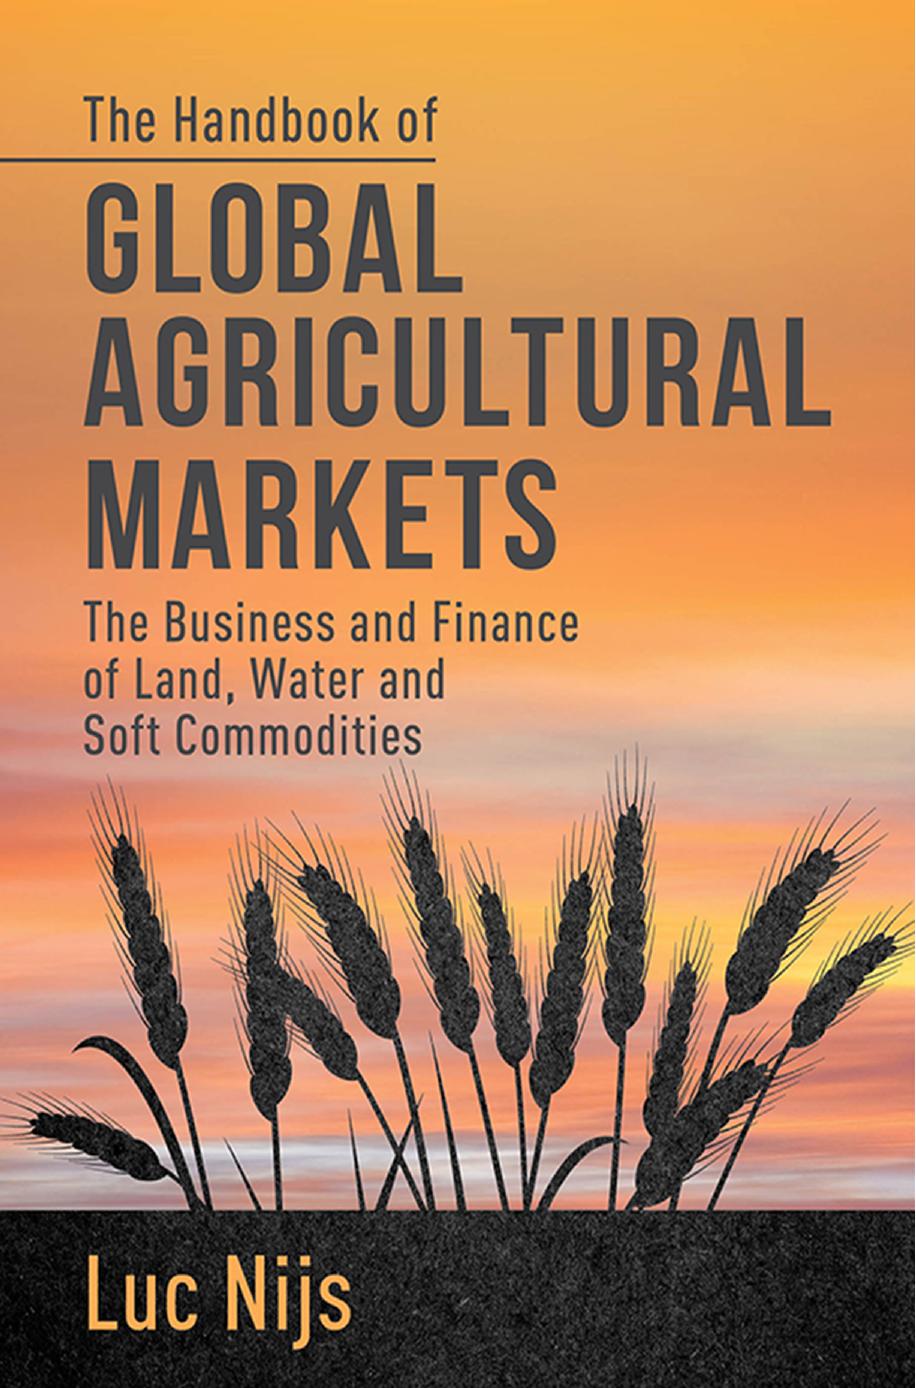 The Handbook of Global Agricultural Markets  The Business and Finance of Land, Water, and Soft Commodities 2014